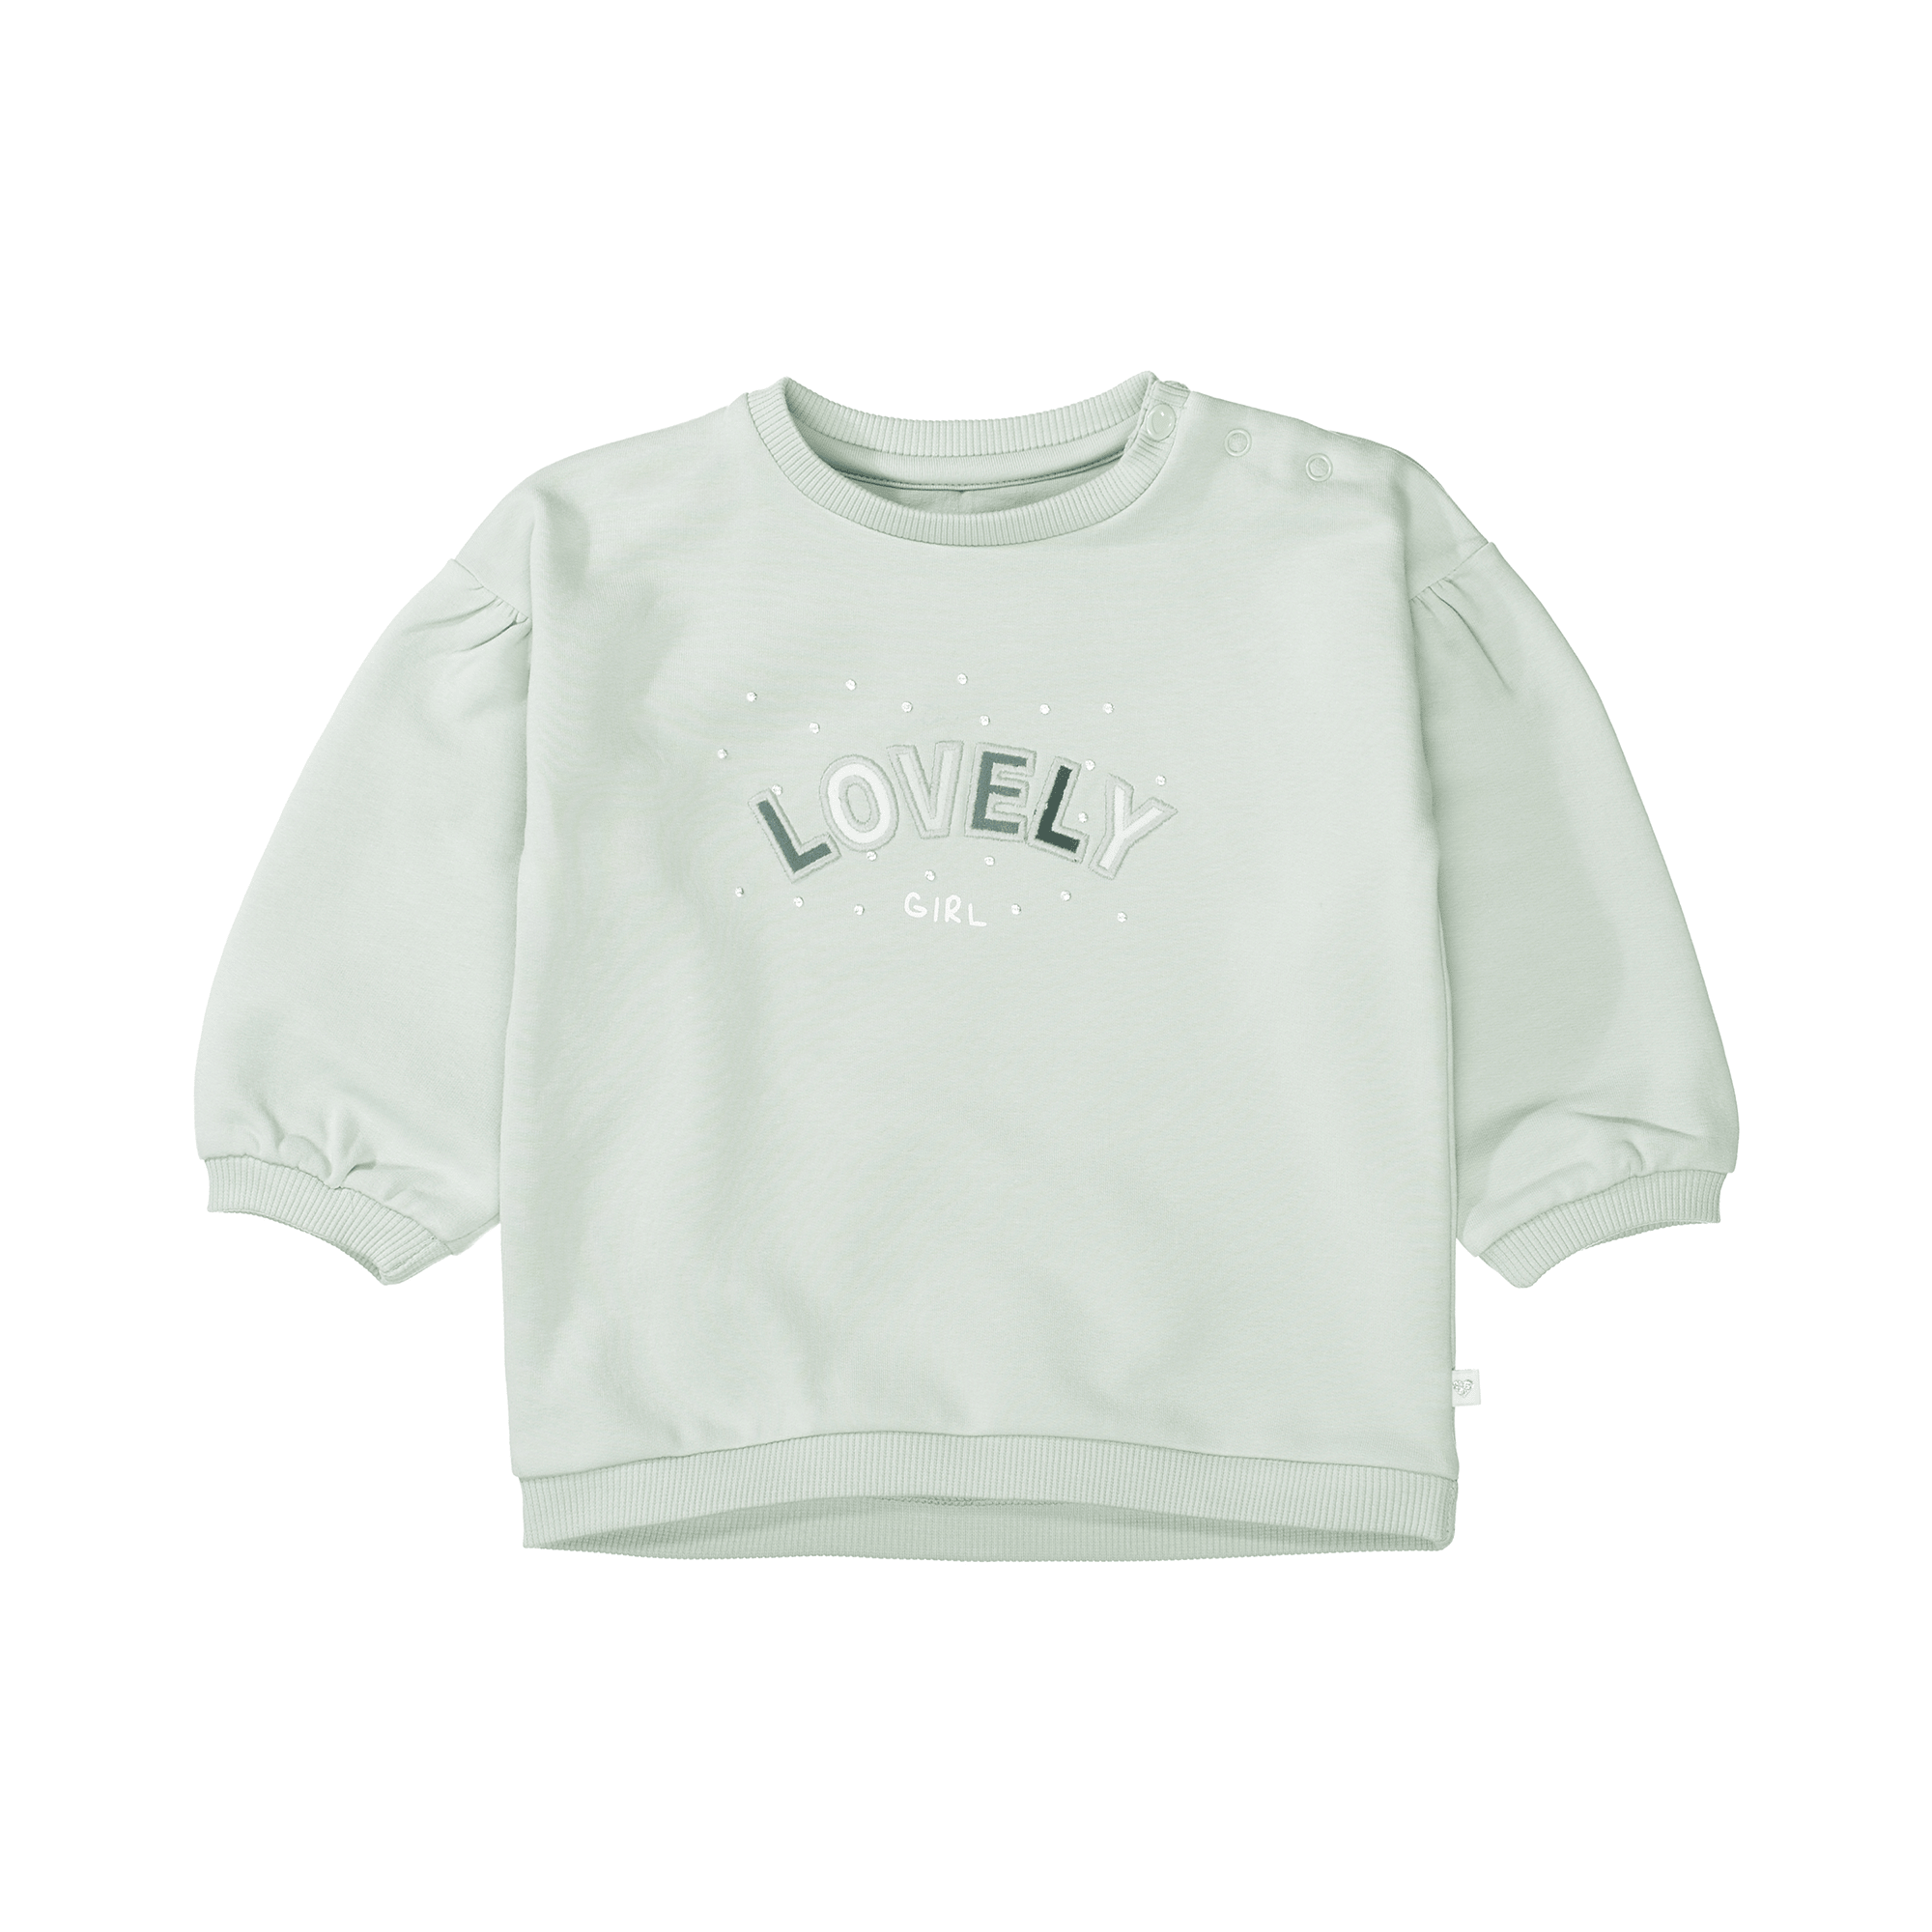 Sweatshirt Lovely STACCATO Mint M2000586869006 1